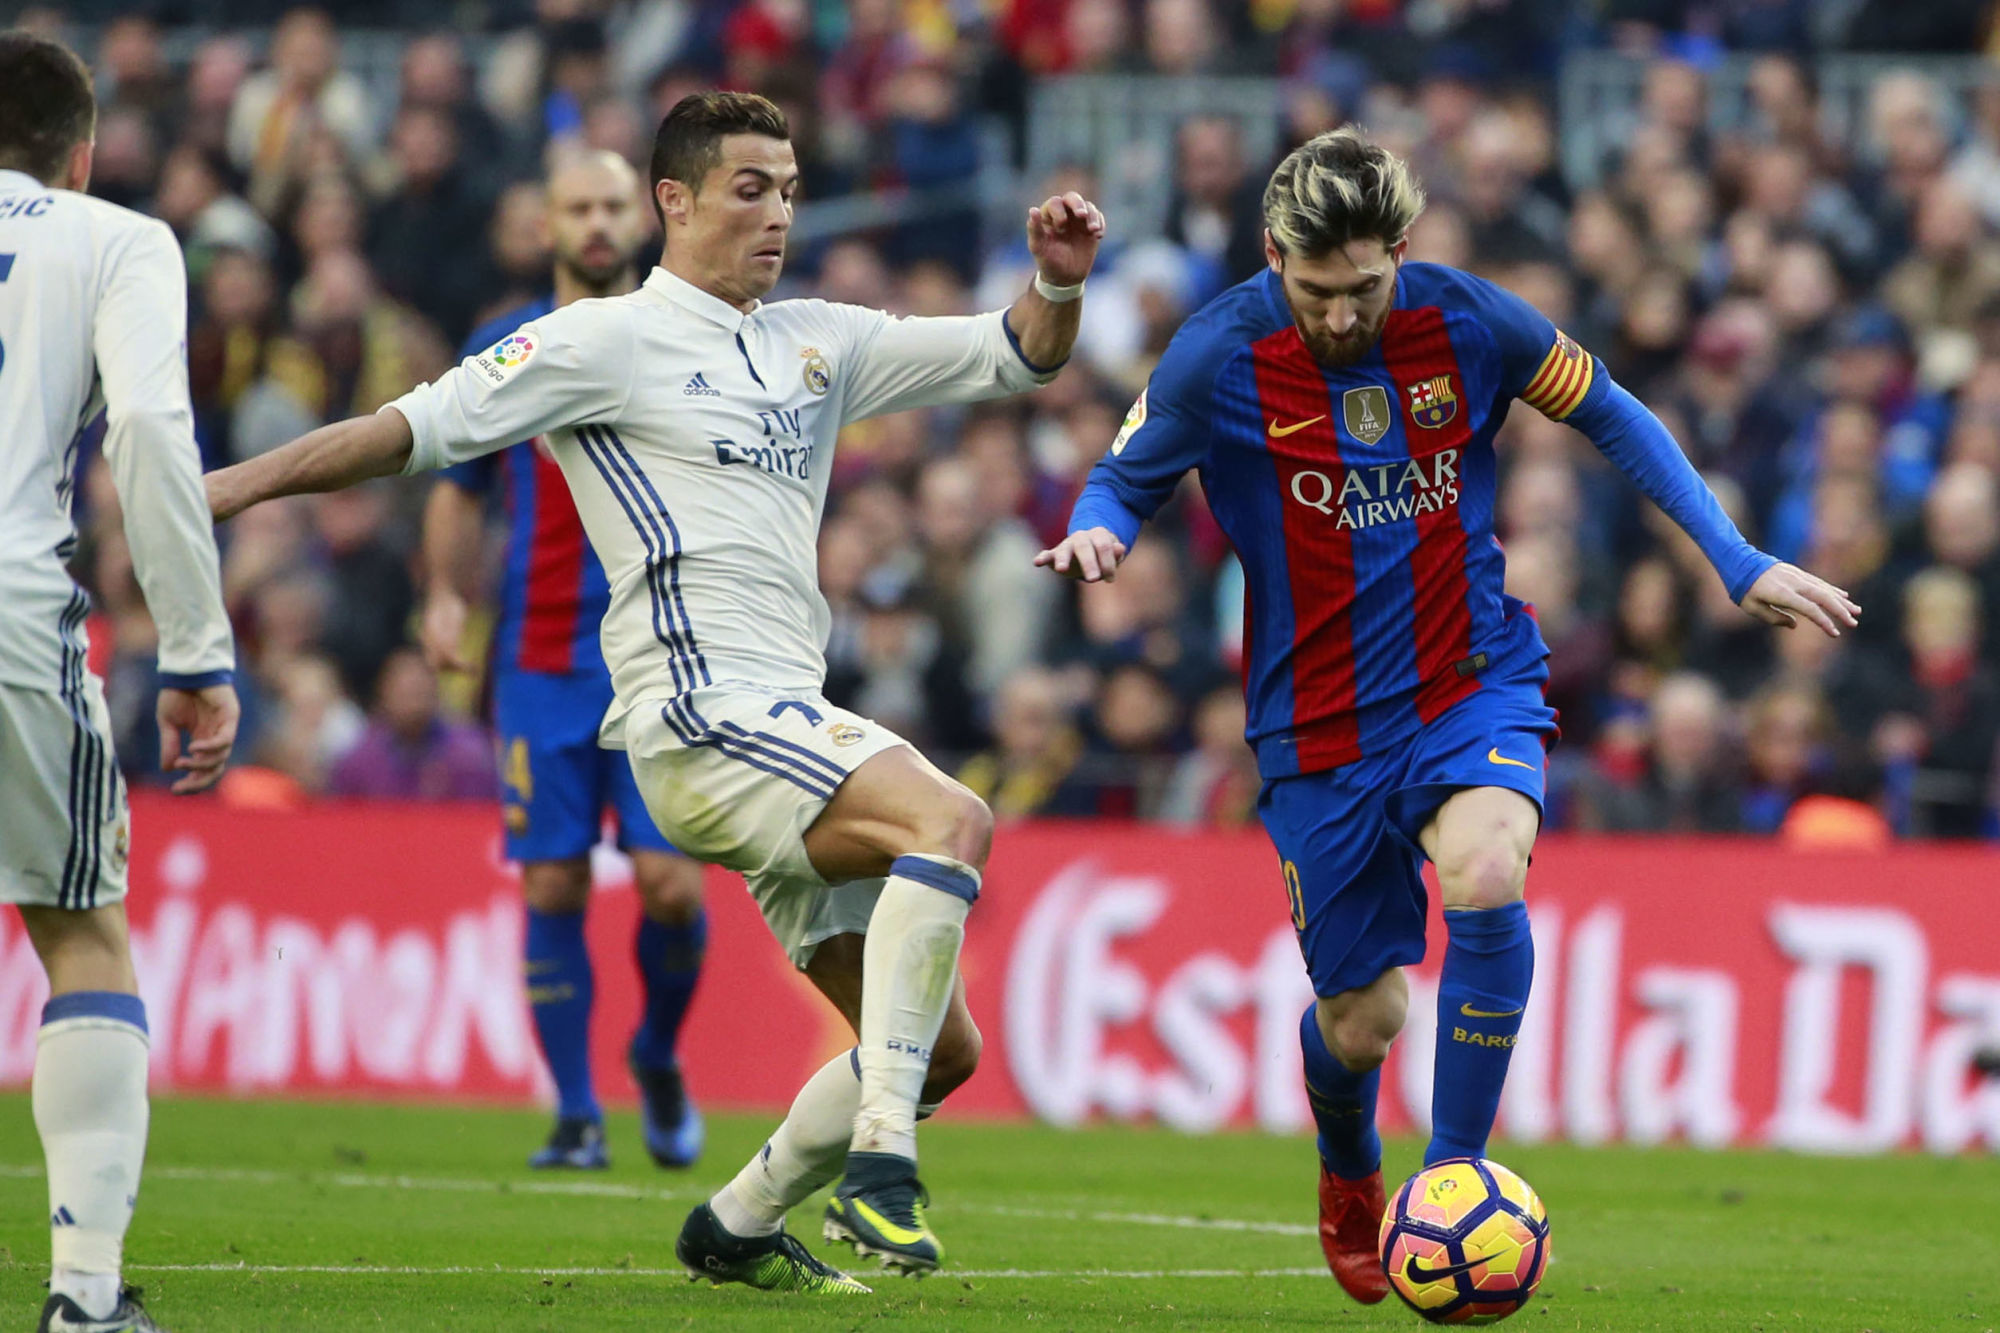 Cristiano Ronaldo and Lionel Messi during the Liga match between FC Barcelona and Real Madrid on December 3, 2016 in Barcelona, Spain. 
Photo by Marca /Icon Sport